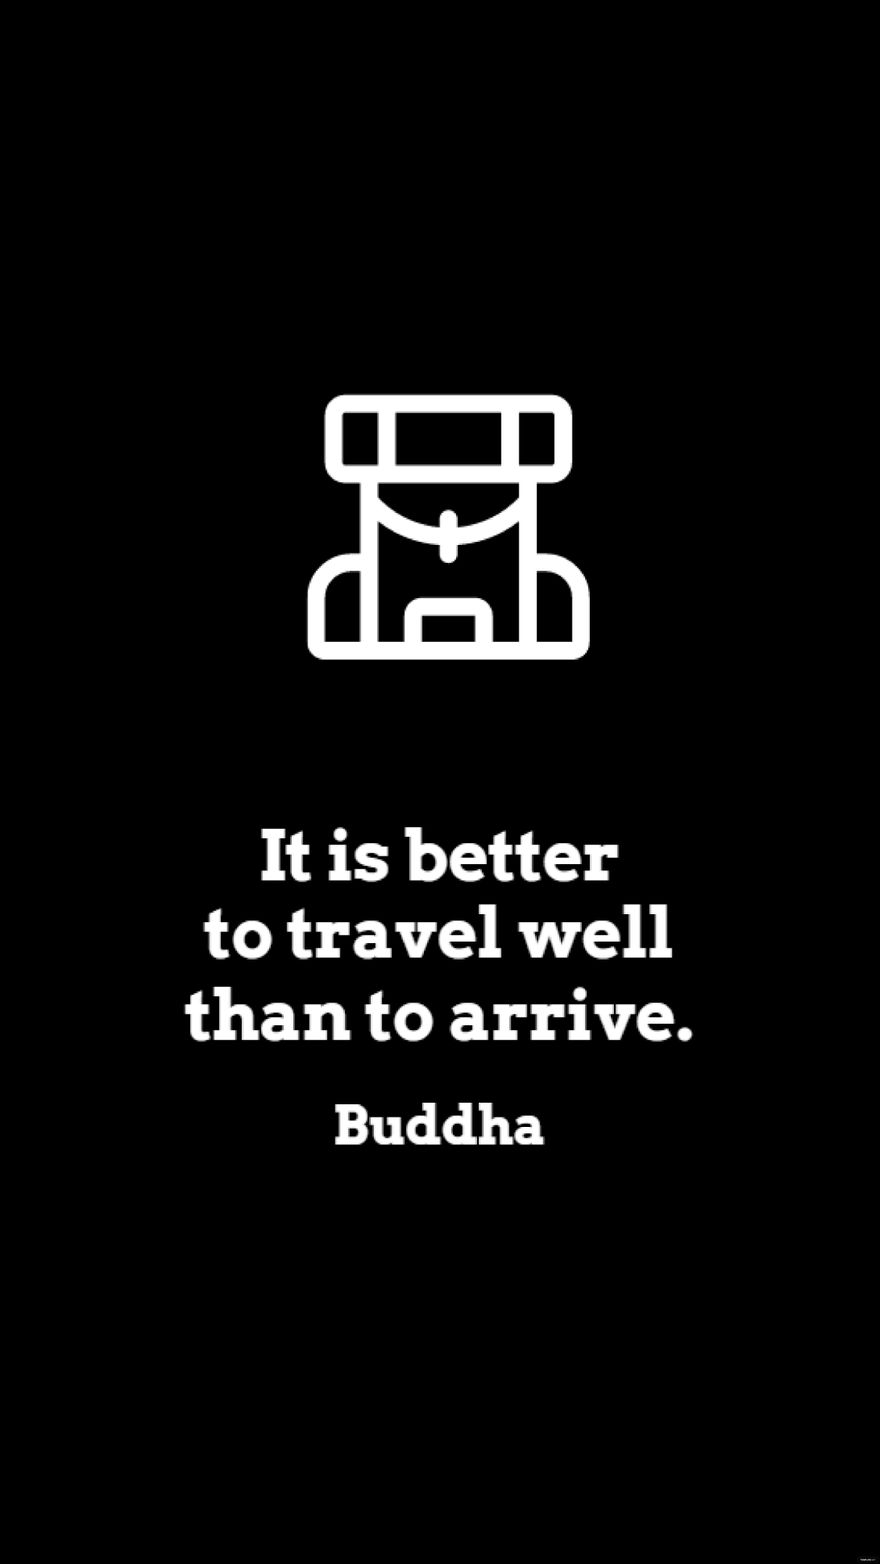 Free Buddha - It is better to travel well than to arrive.